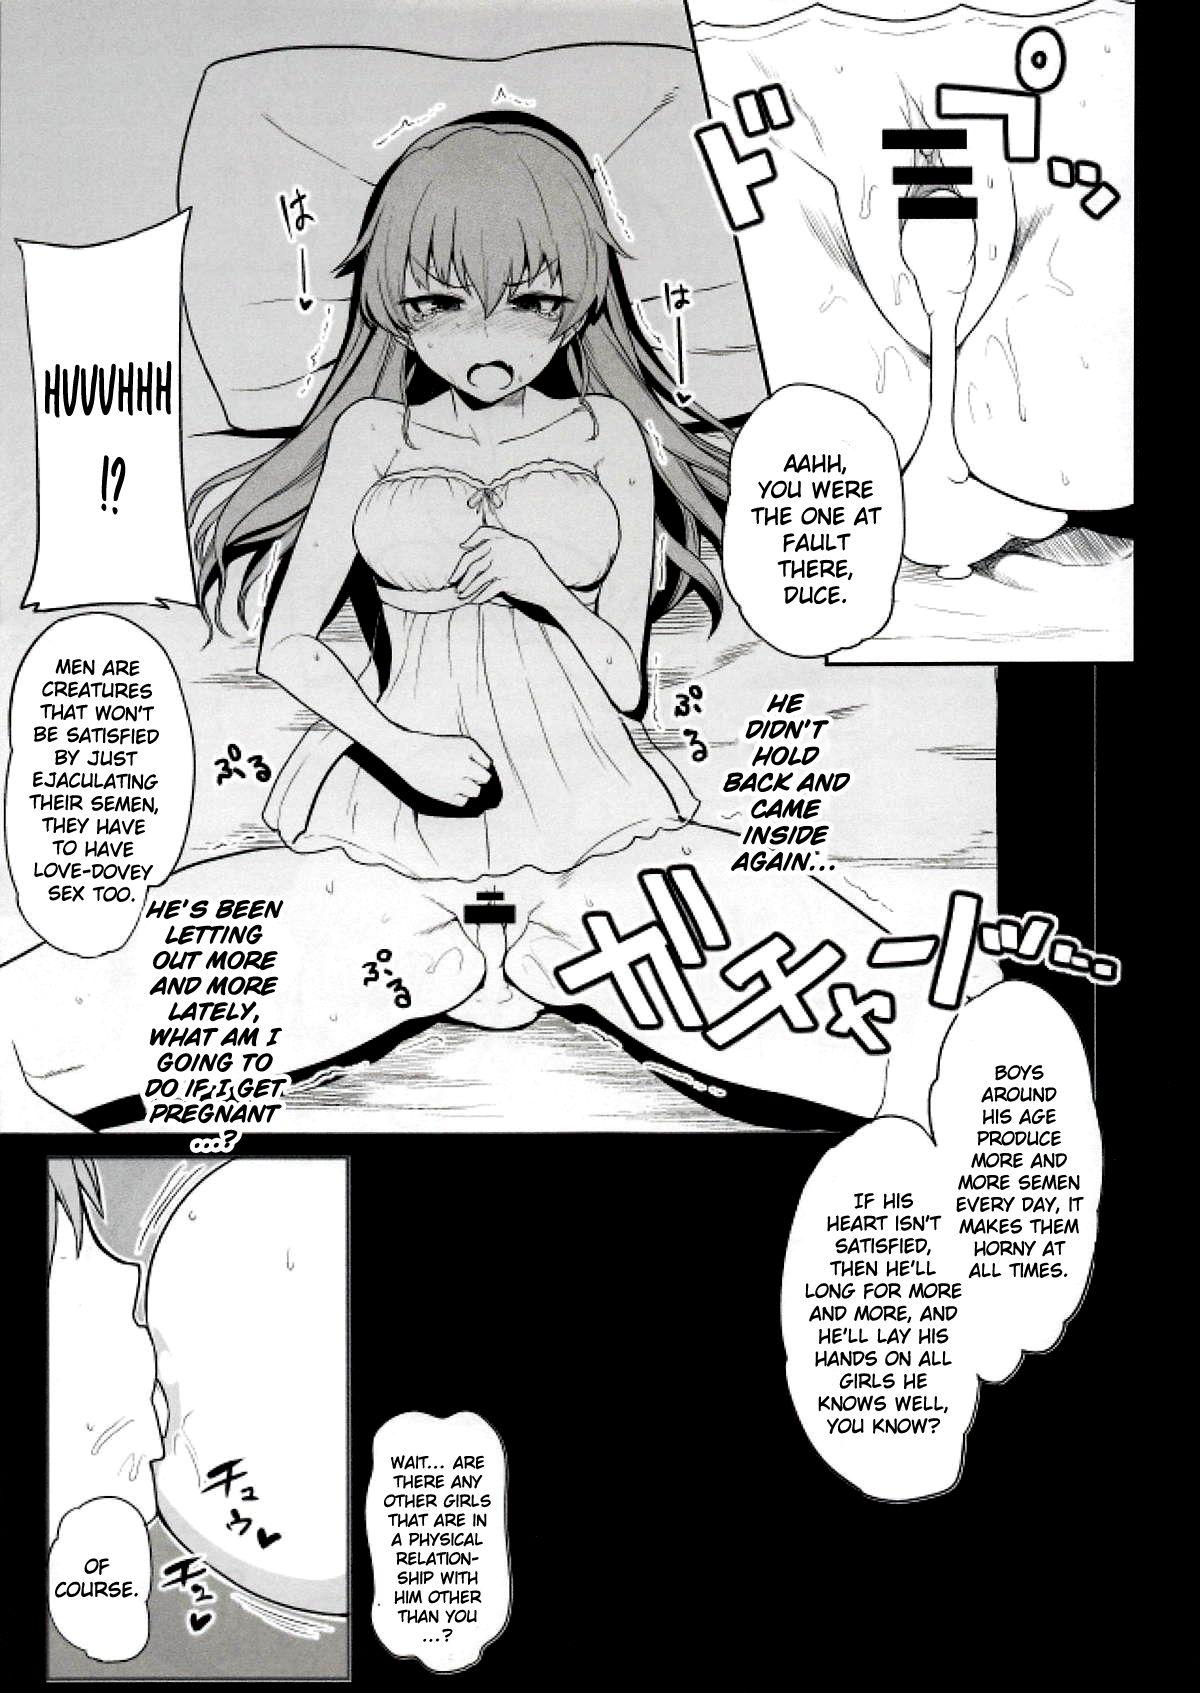 Fuck My Pussy Raise wa Duce no Otouto ni Naritai | I Want To Become Duce's Little Brother In The Future! - Girls und panzer Amateur Porn Free - Page 5